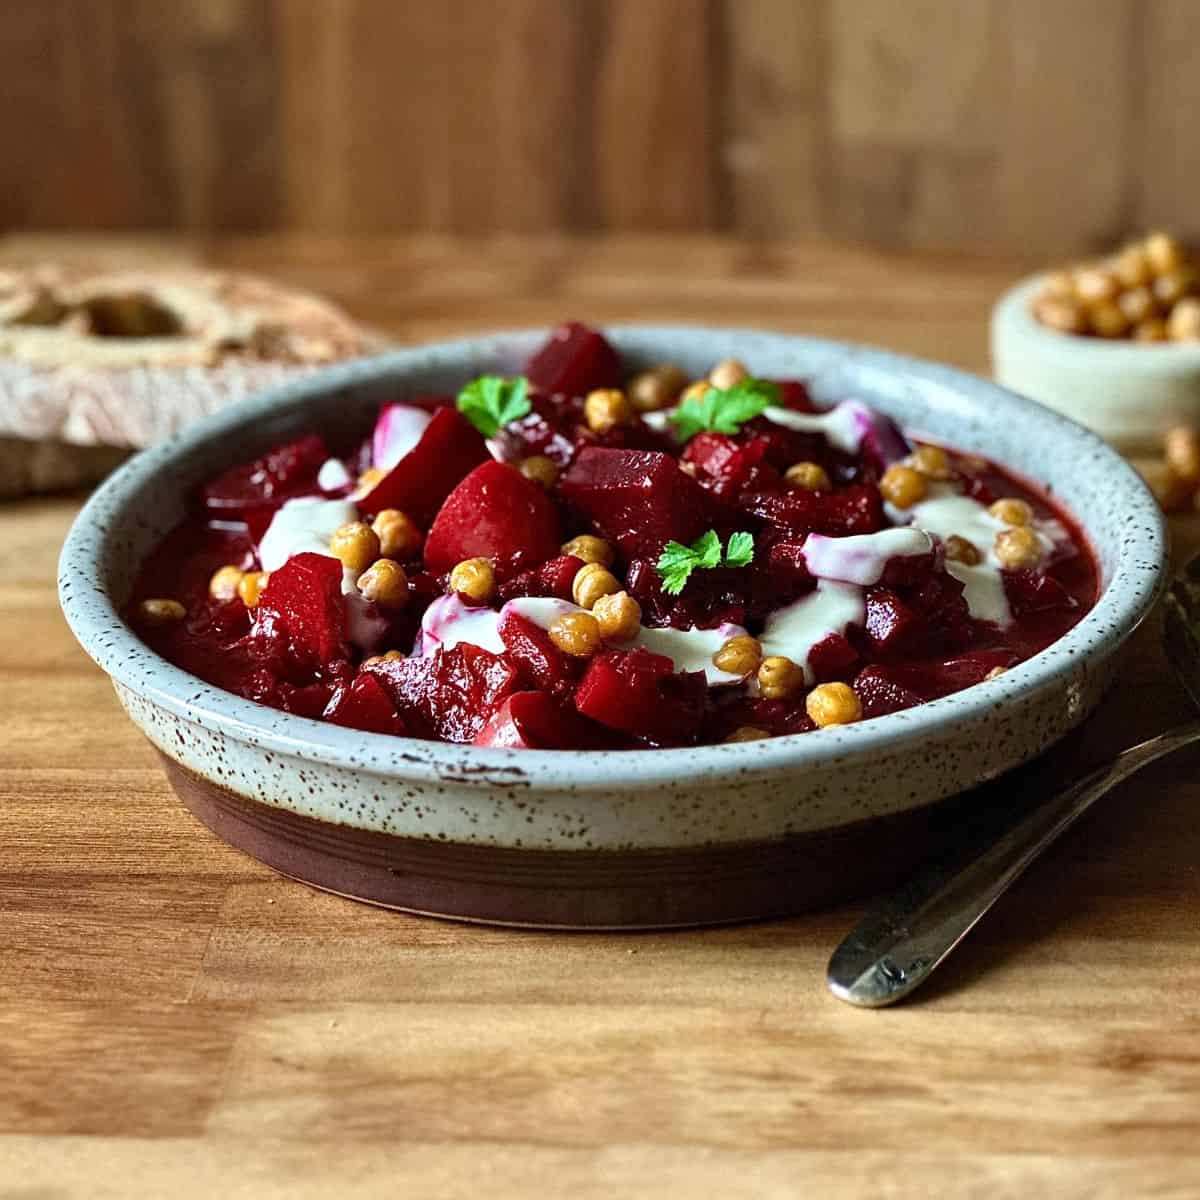 A shallow dish containing beetroot and harissa stew with a yoghurt and chickpea garnish.